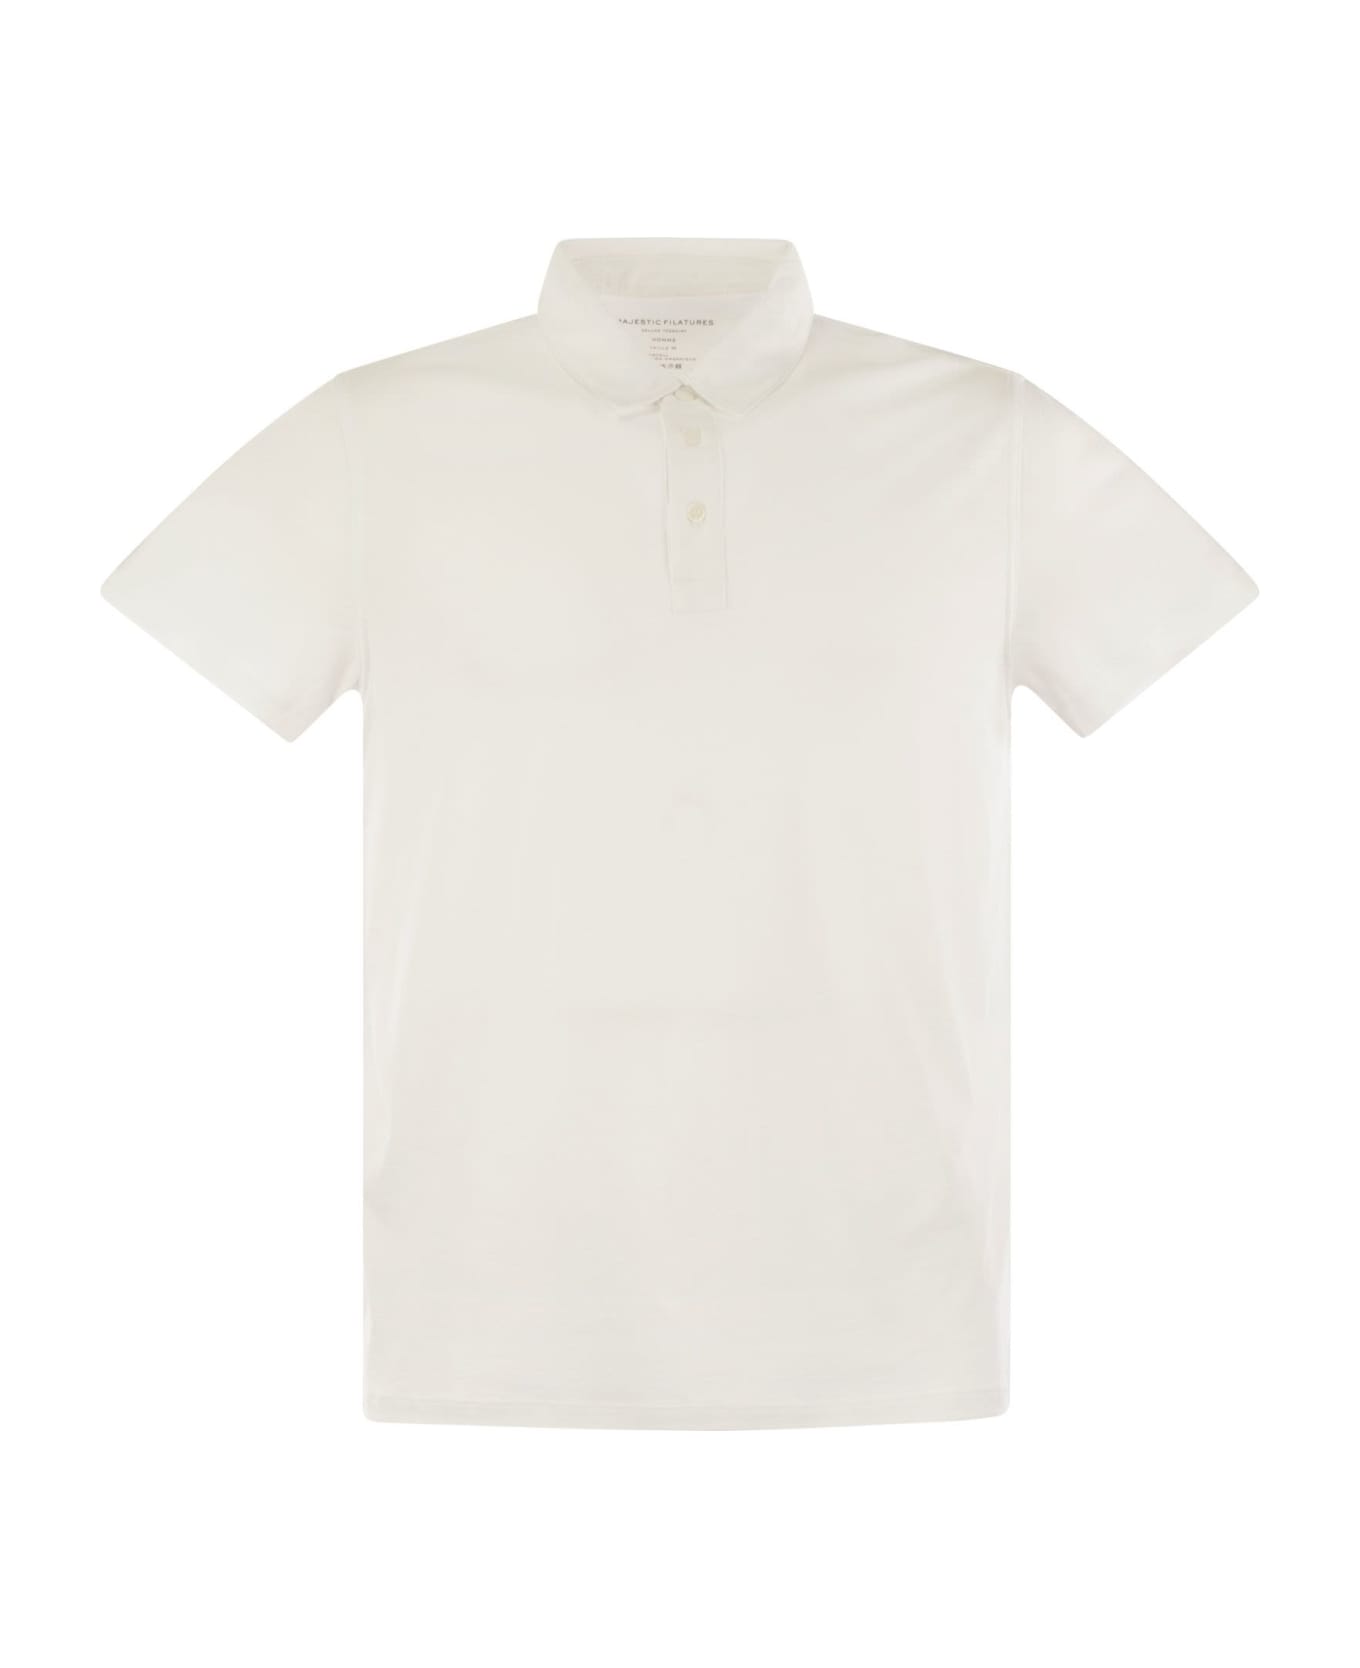 Majestic Filatures Short-sleeved Polo Shirt In Lyocell - Blanc